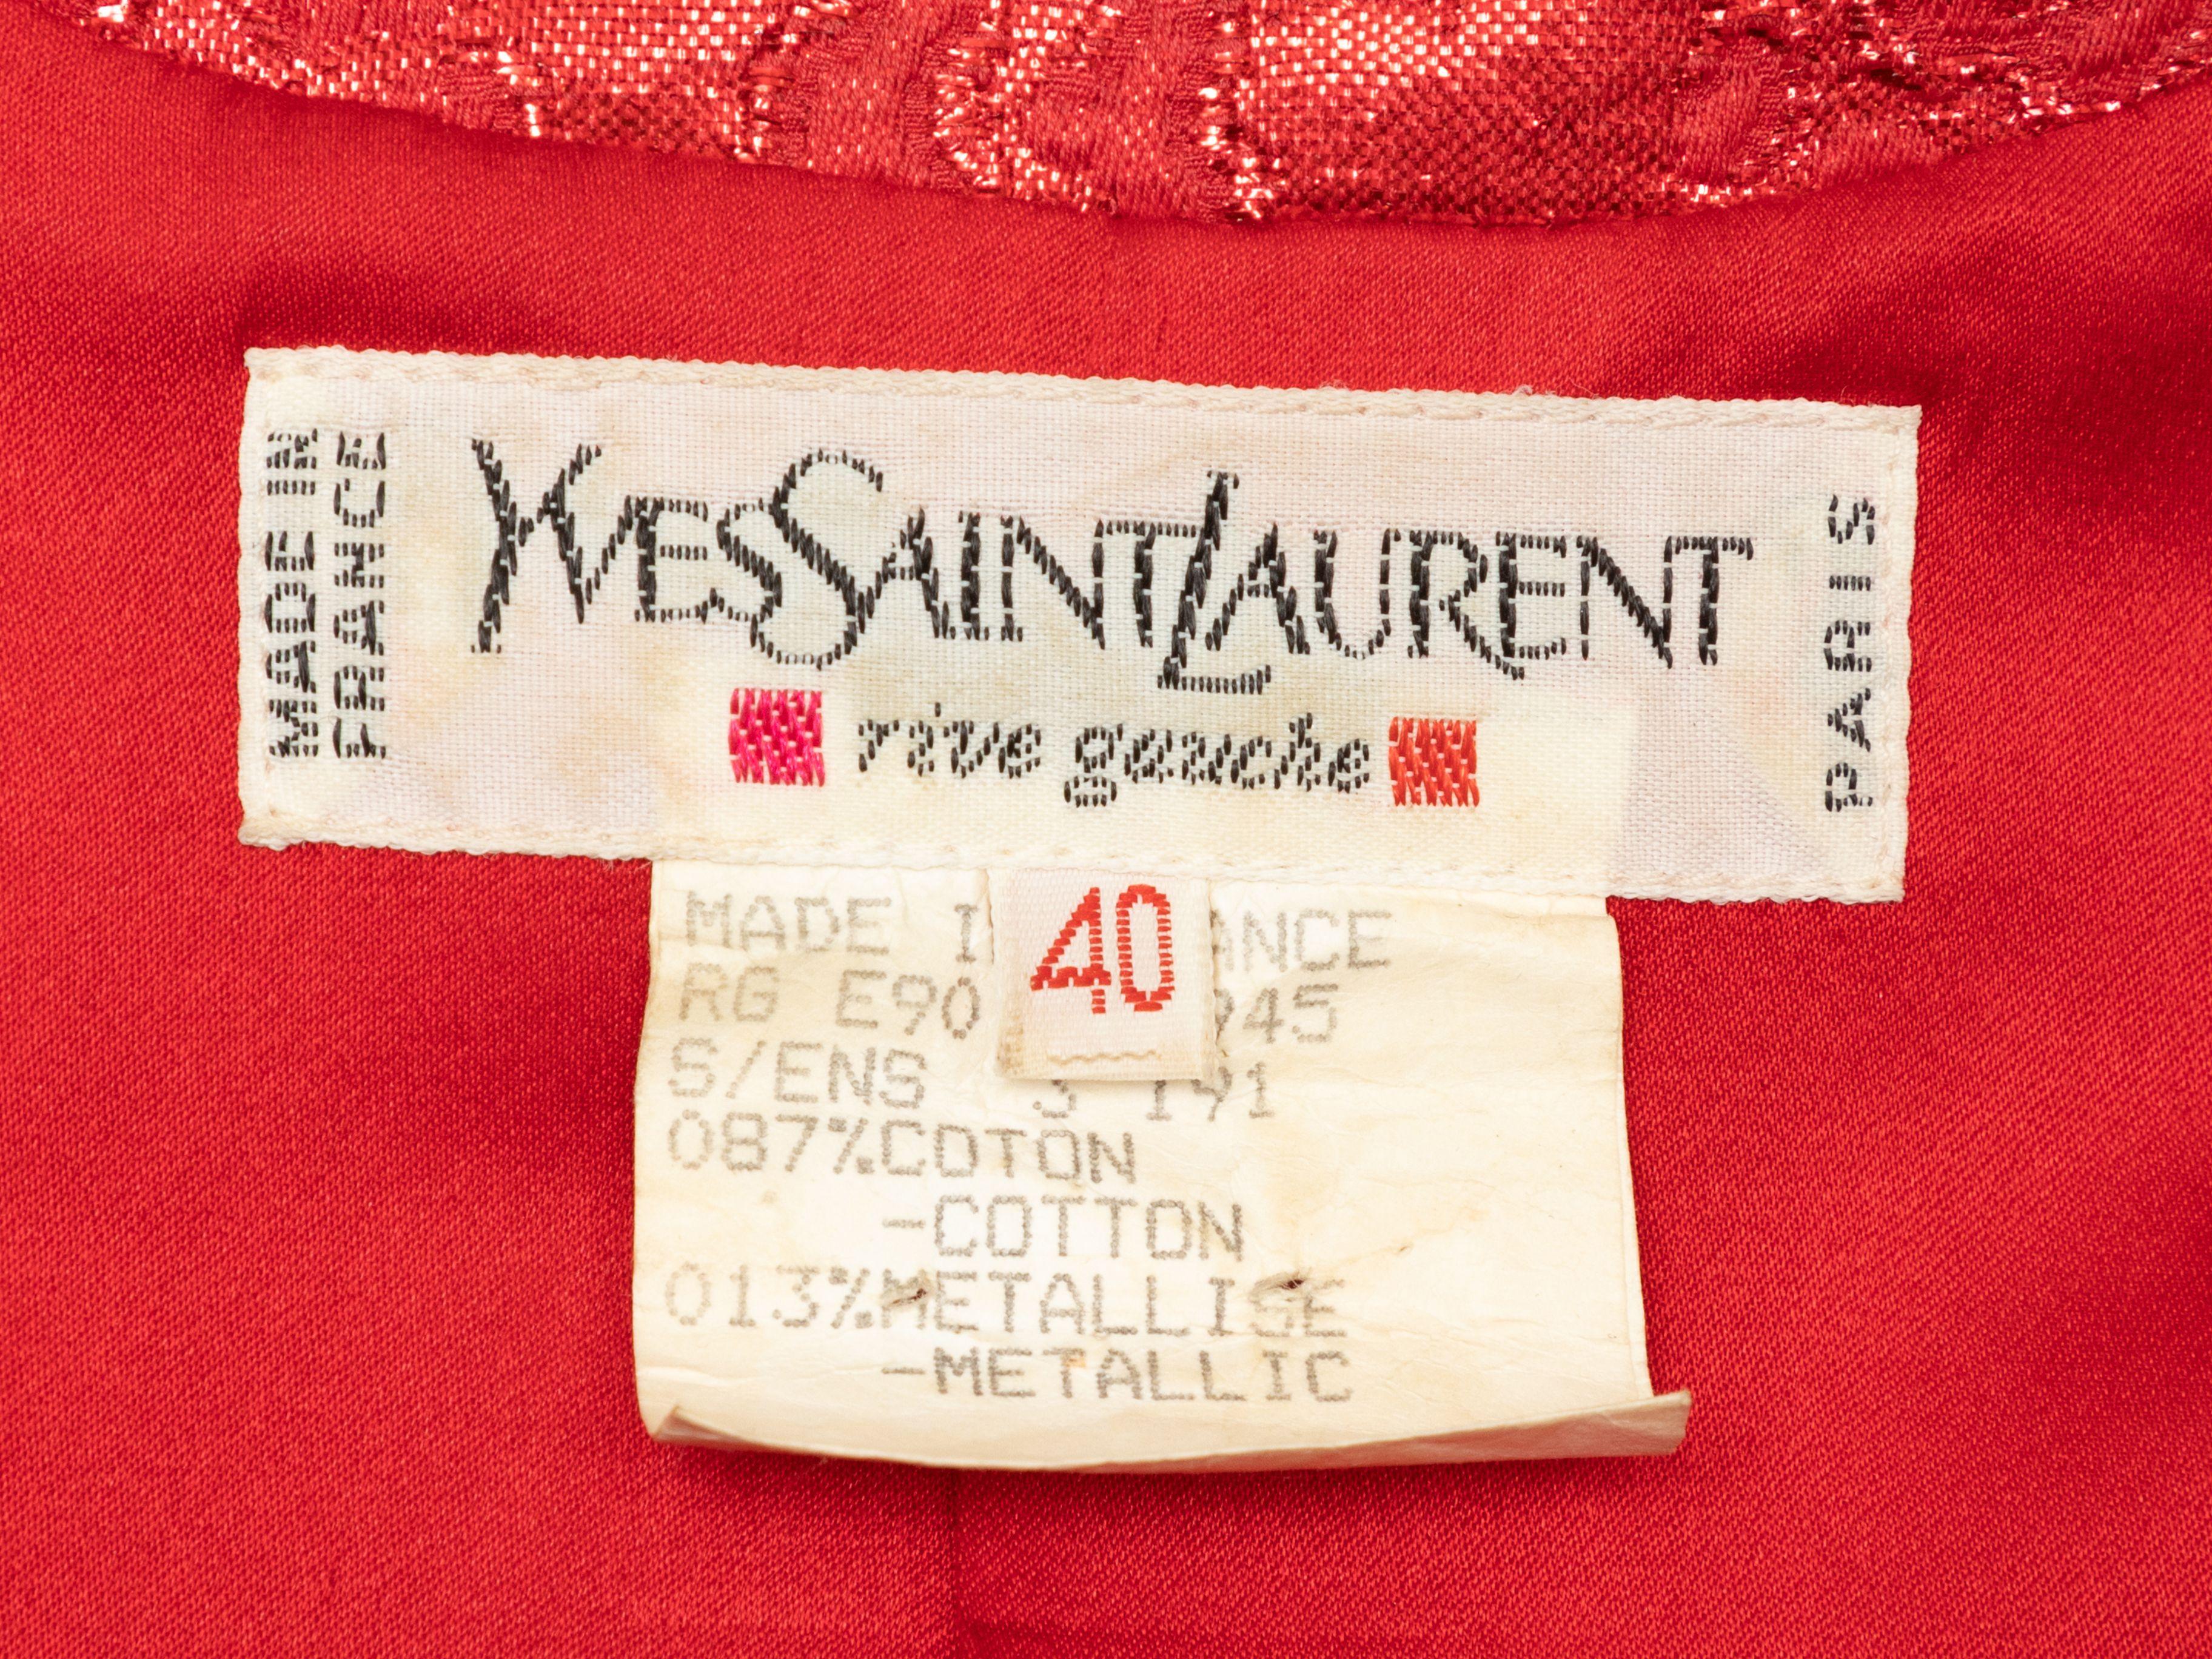 Product Details: Vintage red metallic jacquard collarless jacket by Yves Saint Laurent. Crew neckline. Dual flap pockets at hips. Oversized resin cabochon button closures at front. Designer size 40. 32